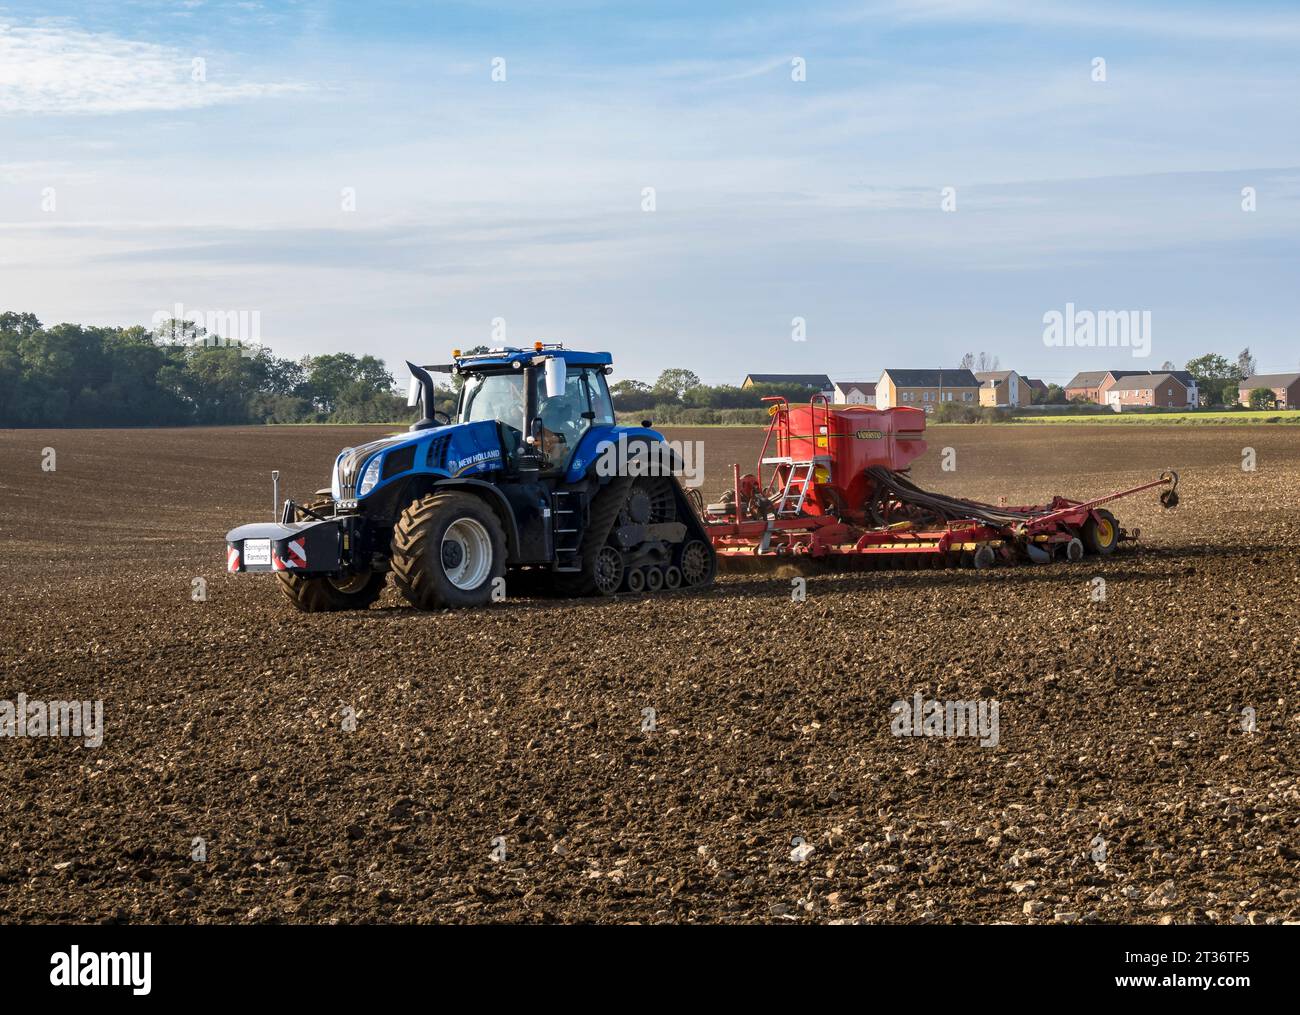 Tractor towing Rapid crop sowing machine setting seed for winter crop, Cherry Willingham, Lincoln City, Lincolnshire, England, UK Stock Photo